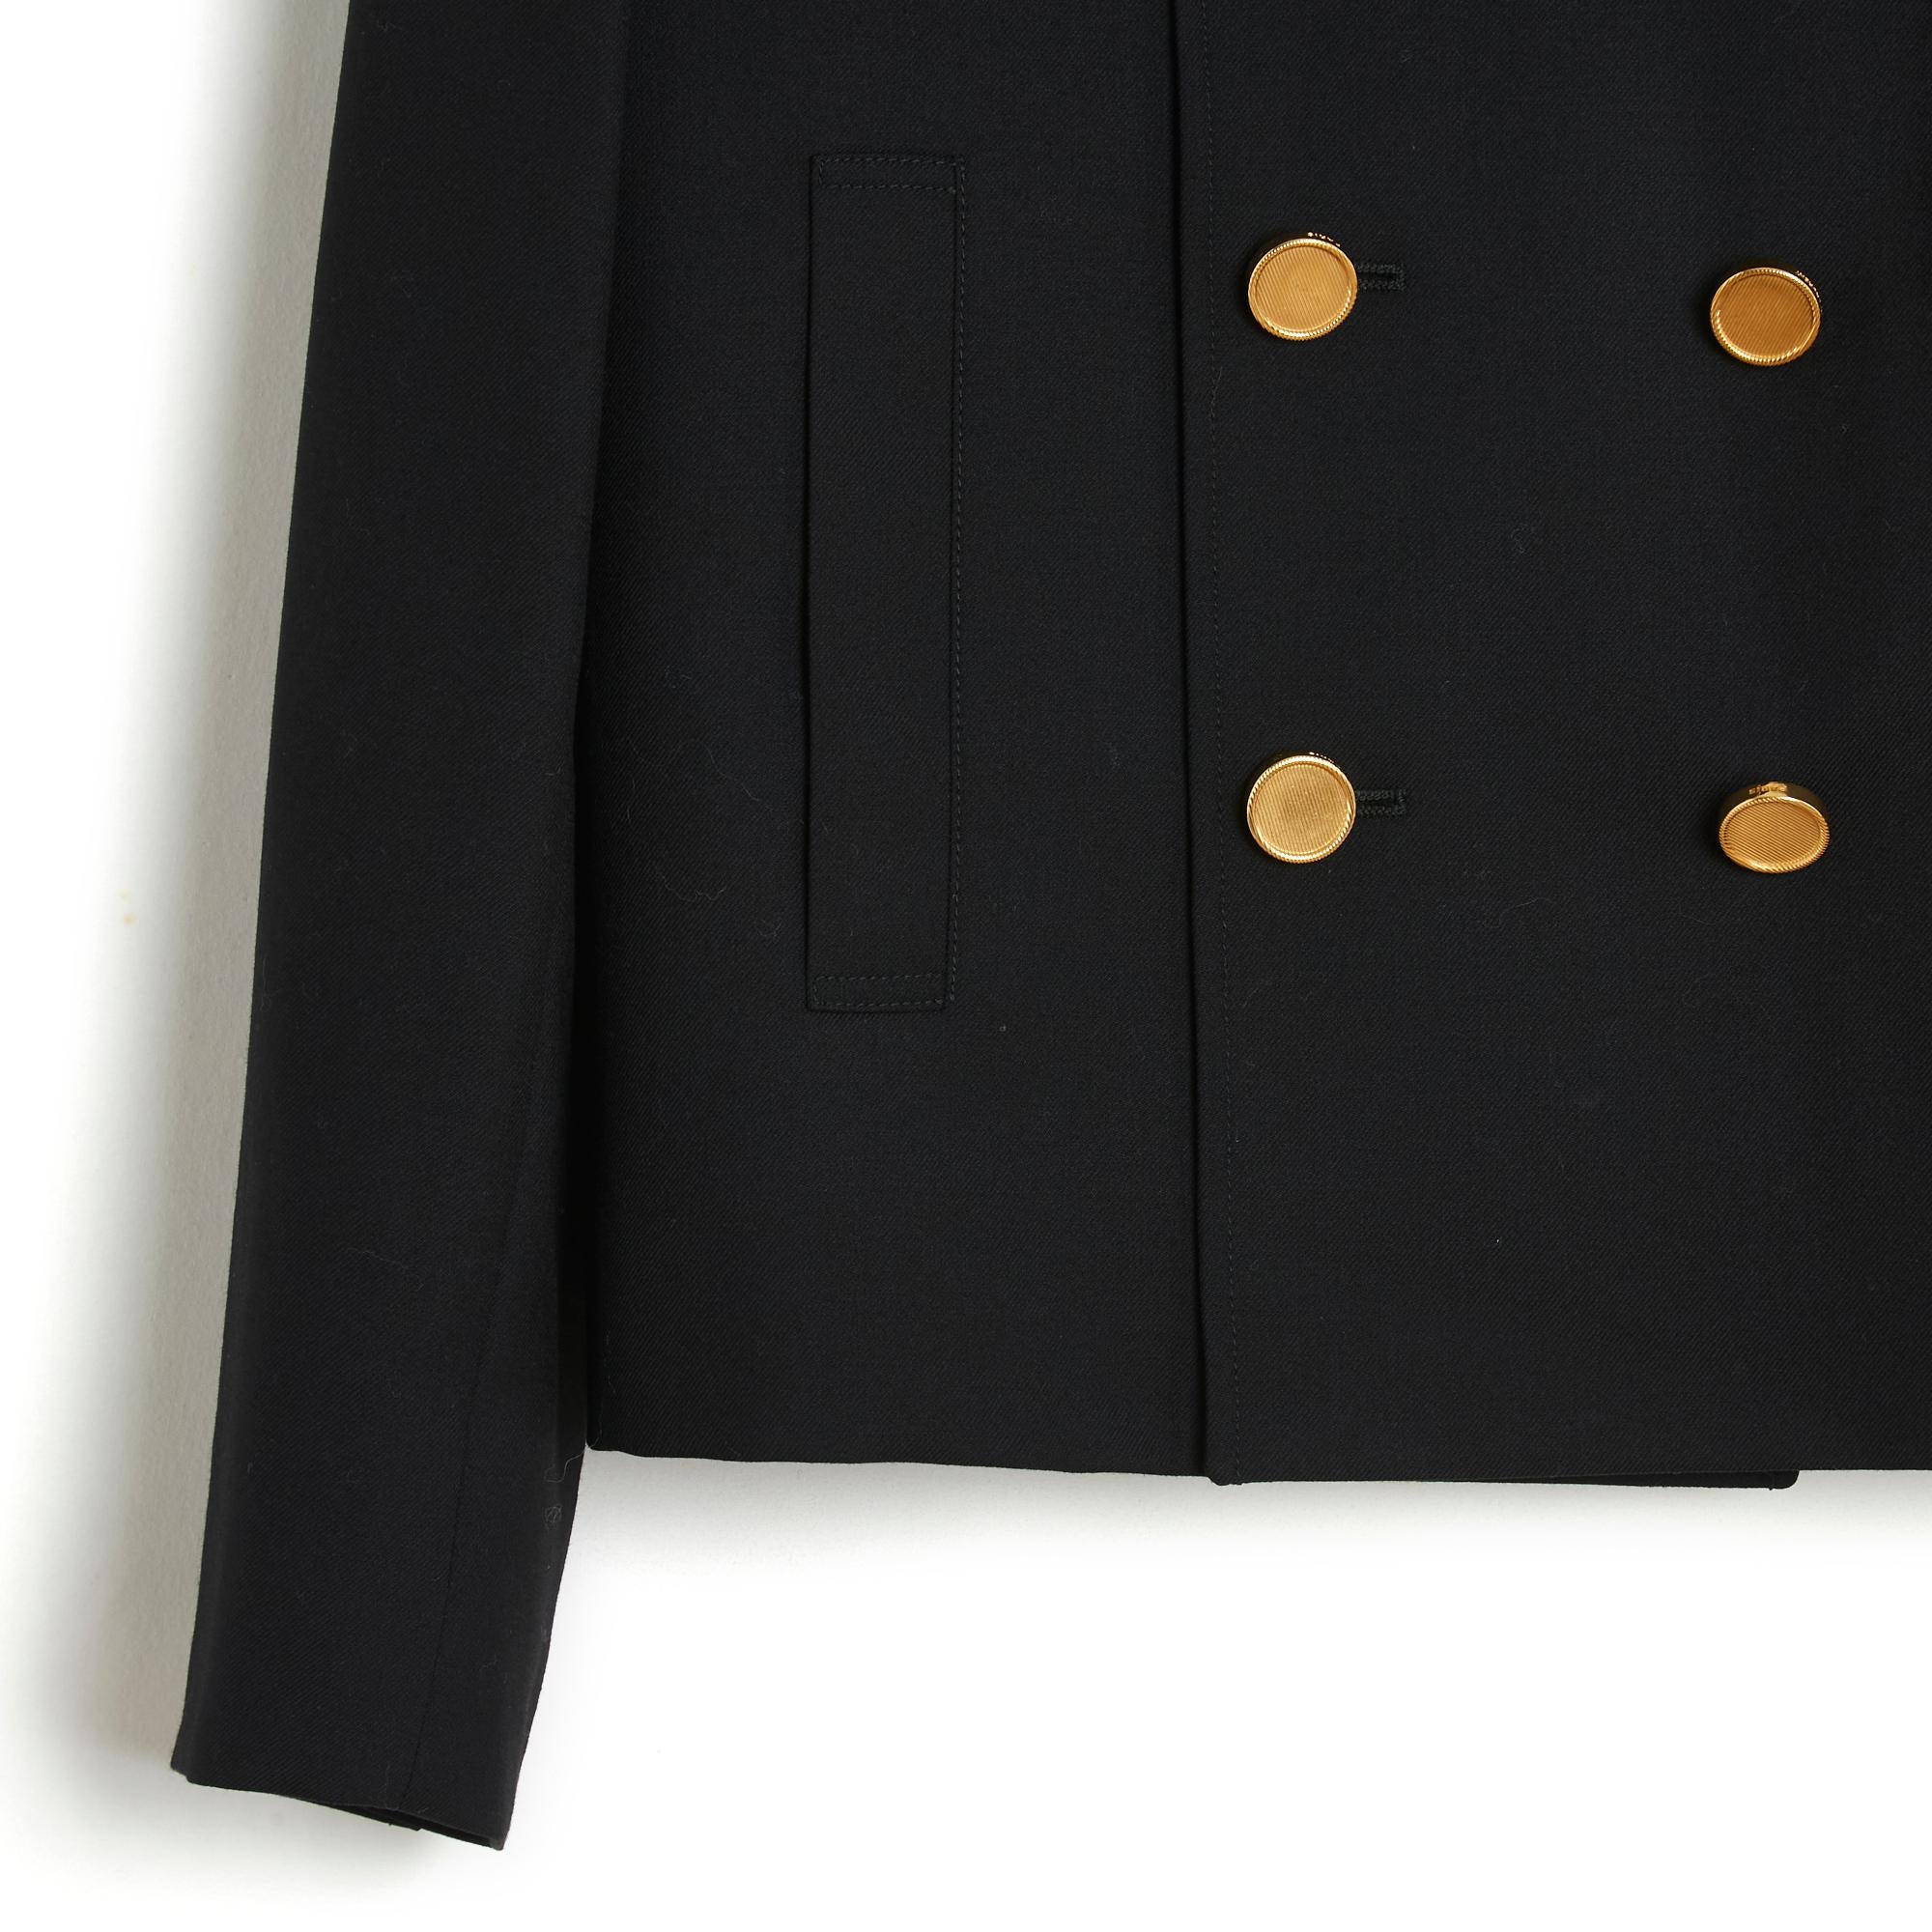 Saint Laurent jacket by Hedi Slimane circa 2013, straight and short cut in black wool cloth, notched collar closed with 6 crossed gold metal buttons, 2 slit pockets at the front, long sleeves closed with 5 jeweled buttons, satin canvas lining black.